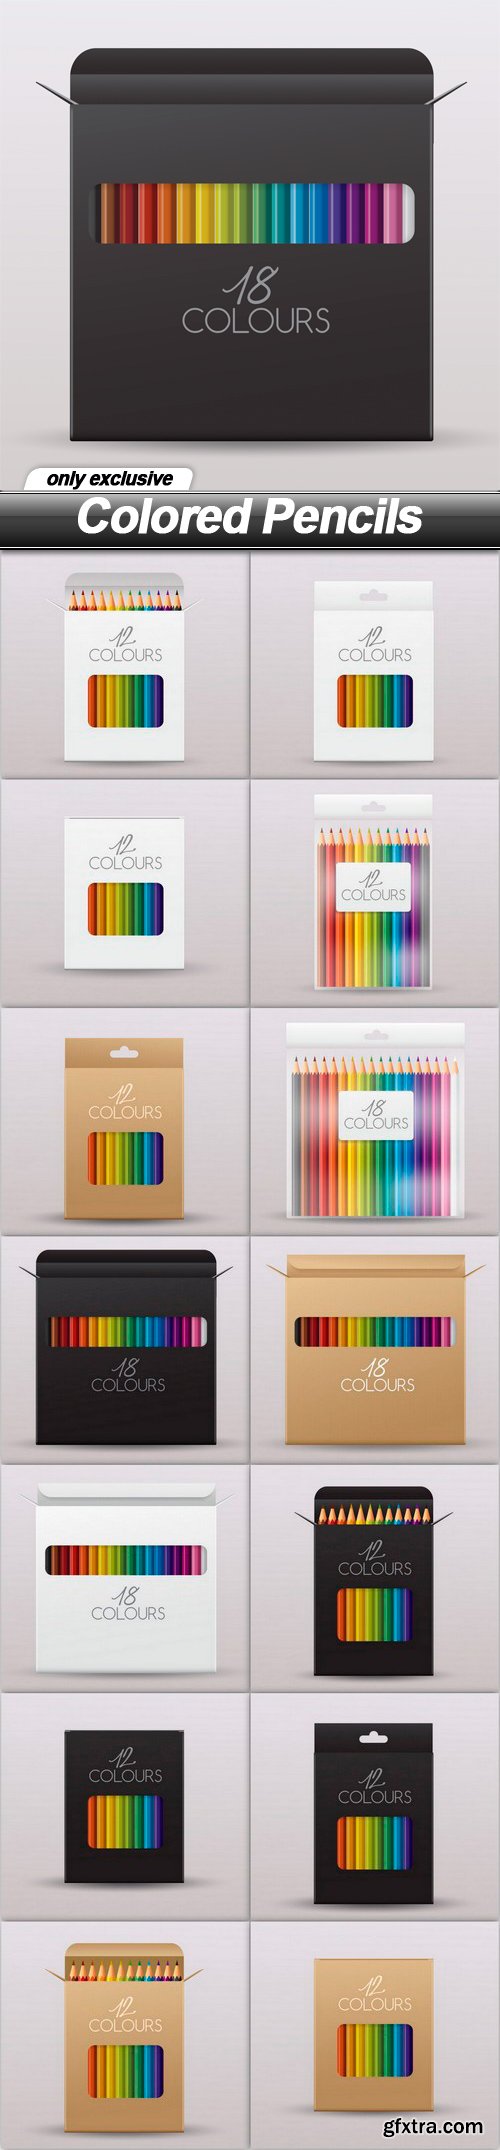 Colored Pencils - 14 EPS